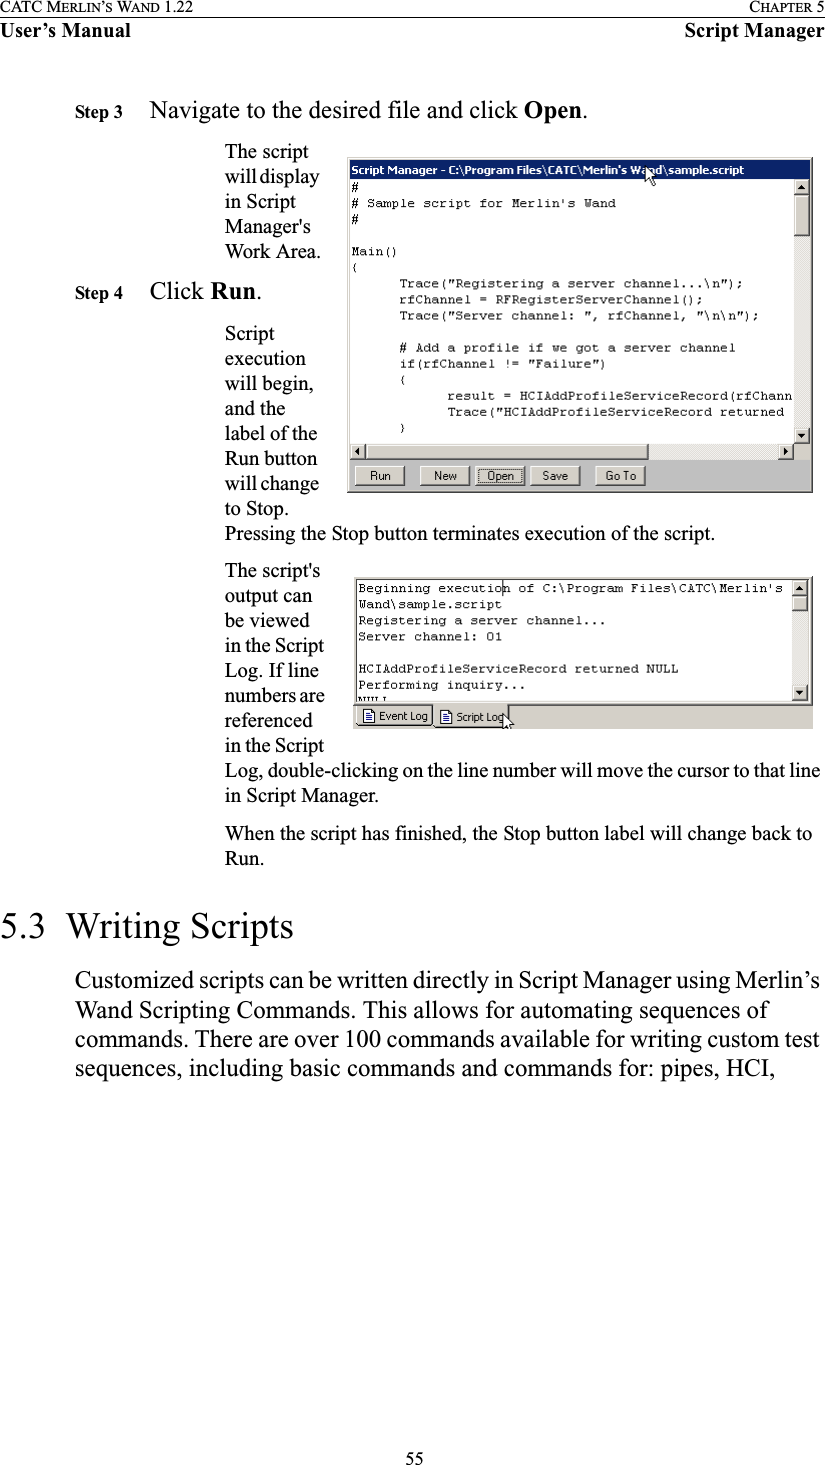  55CATC MERLIN’S WAND 1.22 CHAPTER 5User’s Manual Script ManagerStep 3 Navigate to the desired file and click Open.The script will display in Script Manager&apos;s Work Area.Step 4 Click Run.Script execution will begin, and the label of the Run button will change to Stop. Pressing the Stop button terminates execution of the script.The script&apos;s output can be viewed in the Script Log. If line numbers are referenced in the Script Log, double-clicking on the line number will move the cursor to that line in Script Manager.When the script has finished, the Stop button label will change back to Run.5.3  Writing ScriptsCustomized scripts can be written directly in Script Manager using Merlin’s Wand Scripting Commands. This allows for automating sequences of commands. There are over 100 commands available for writing custom test sequences, including basic commands and commands for: pipes, HCI, 